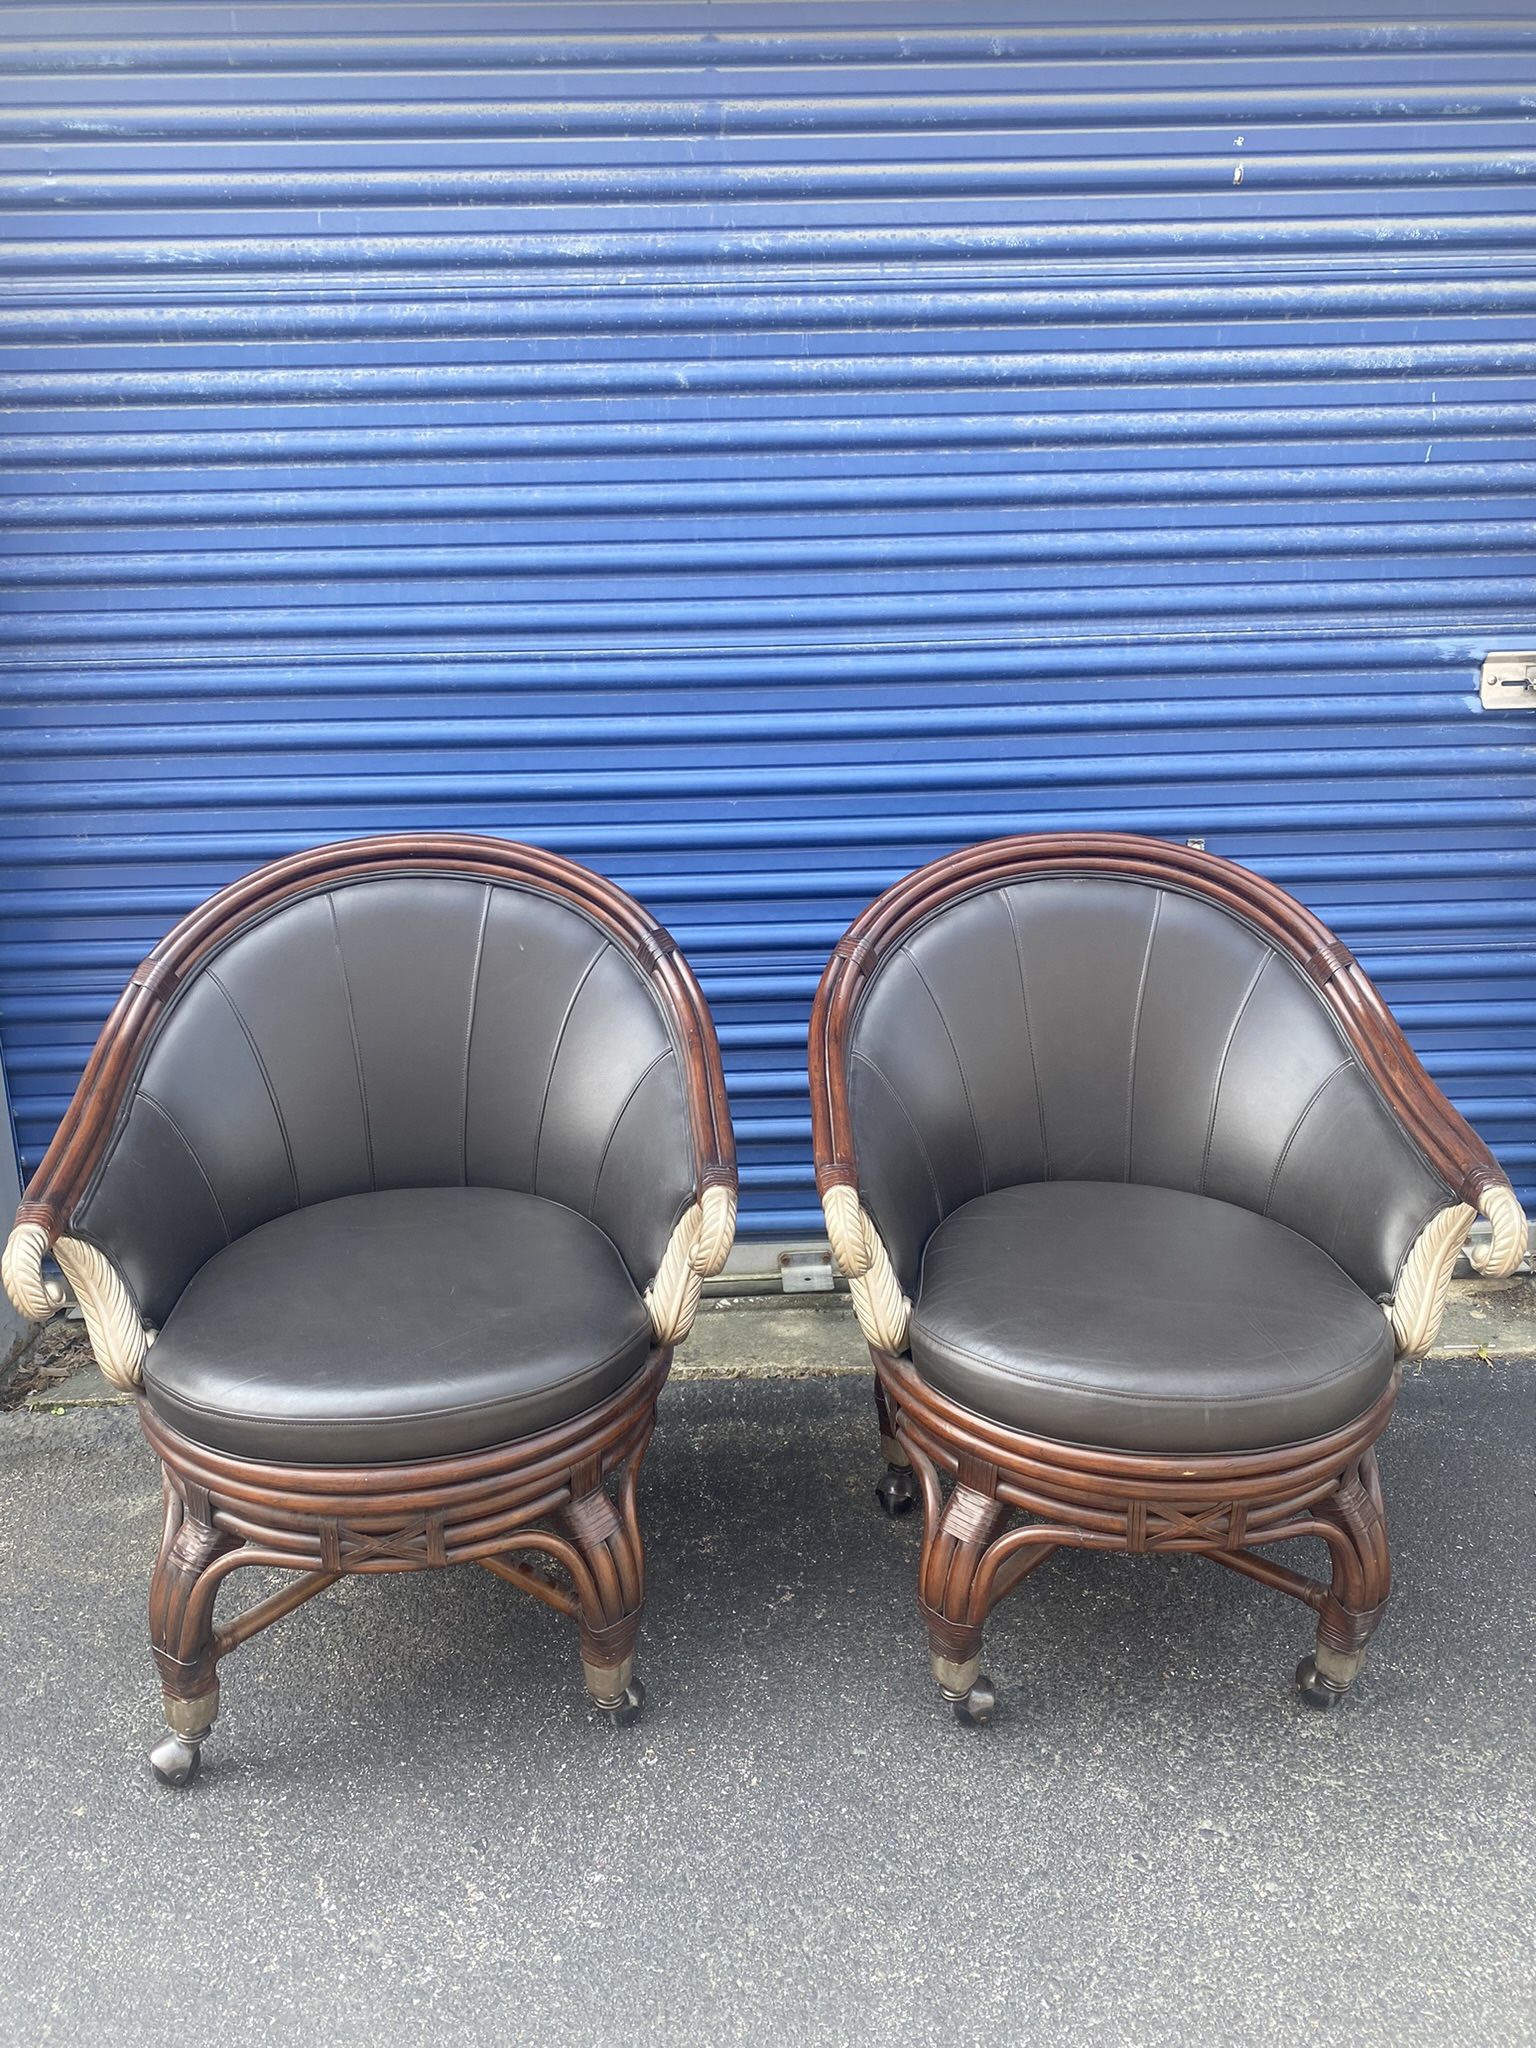 PRICE DROP! Vintage Pair Of Black Leather Chairs With Bamboo Frame/legs and Wheels